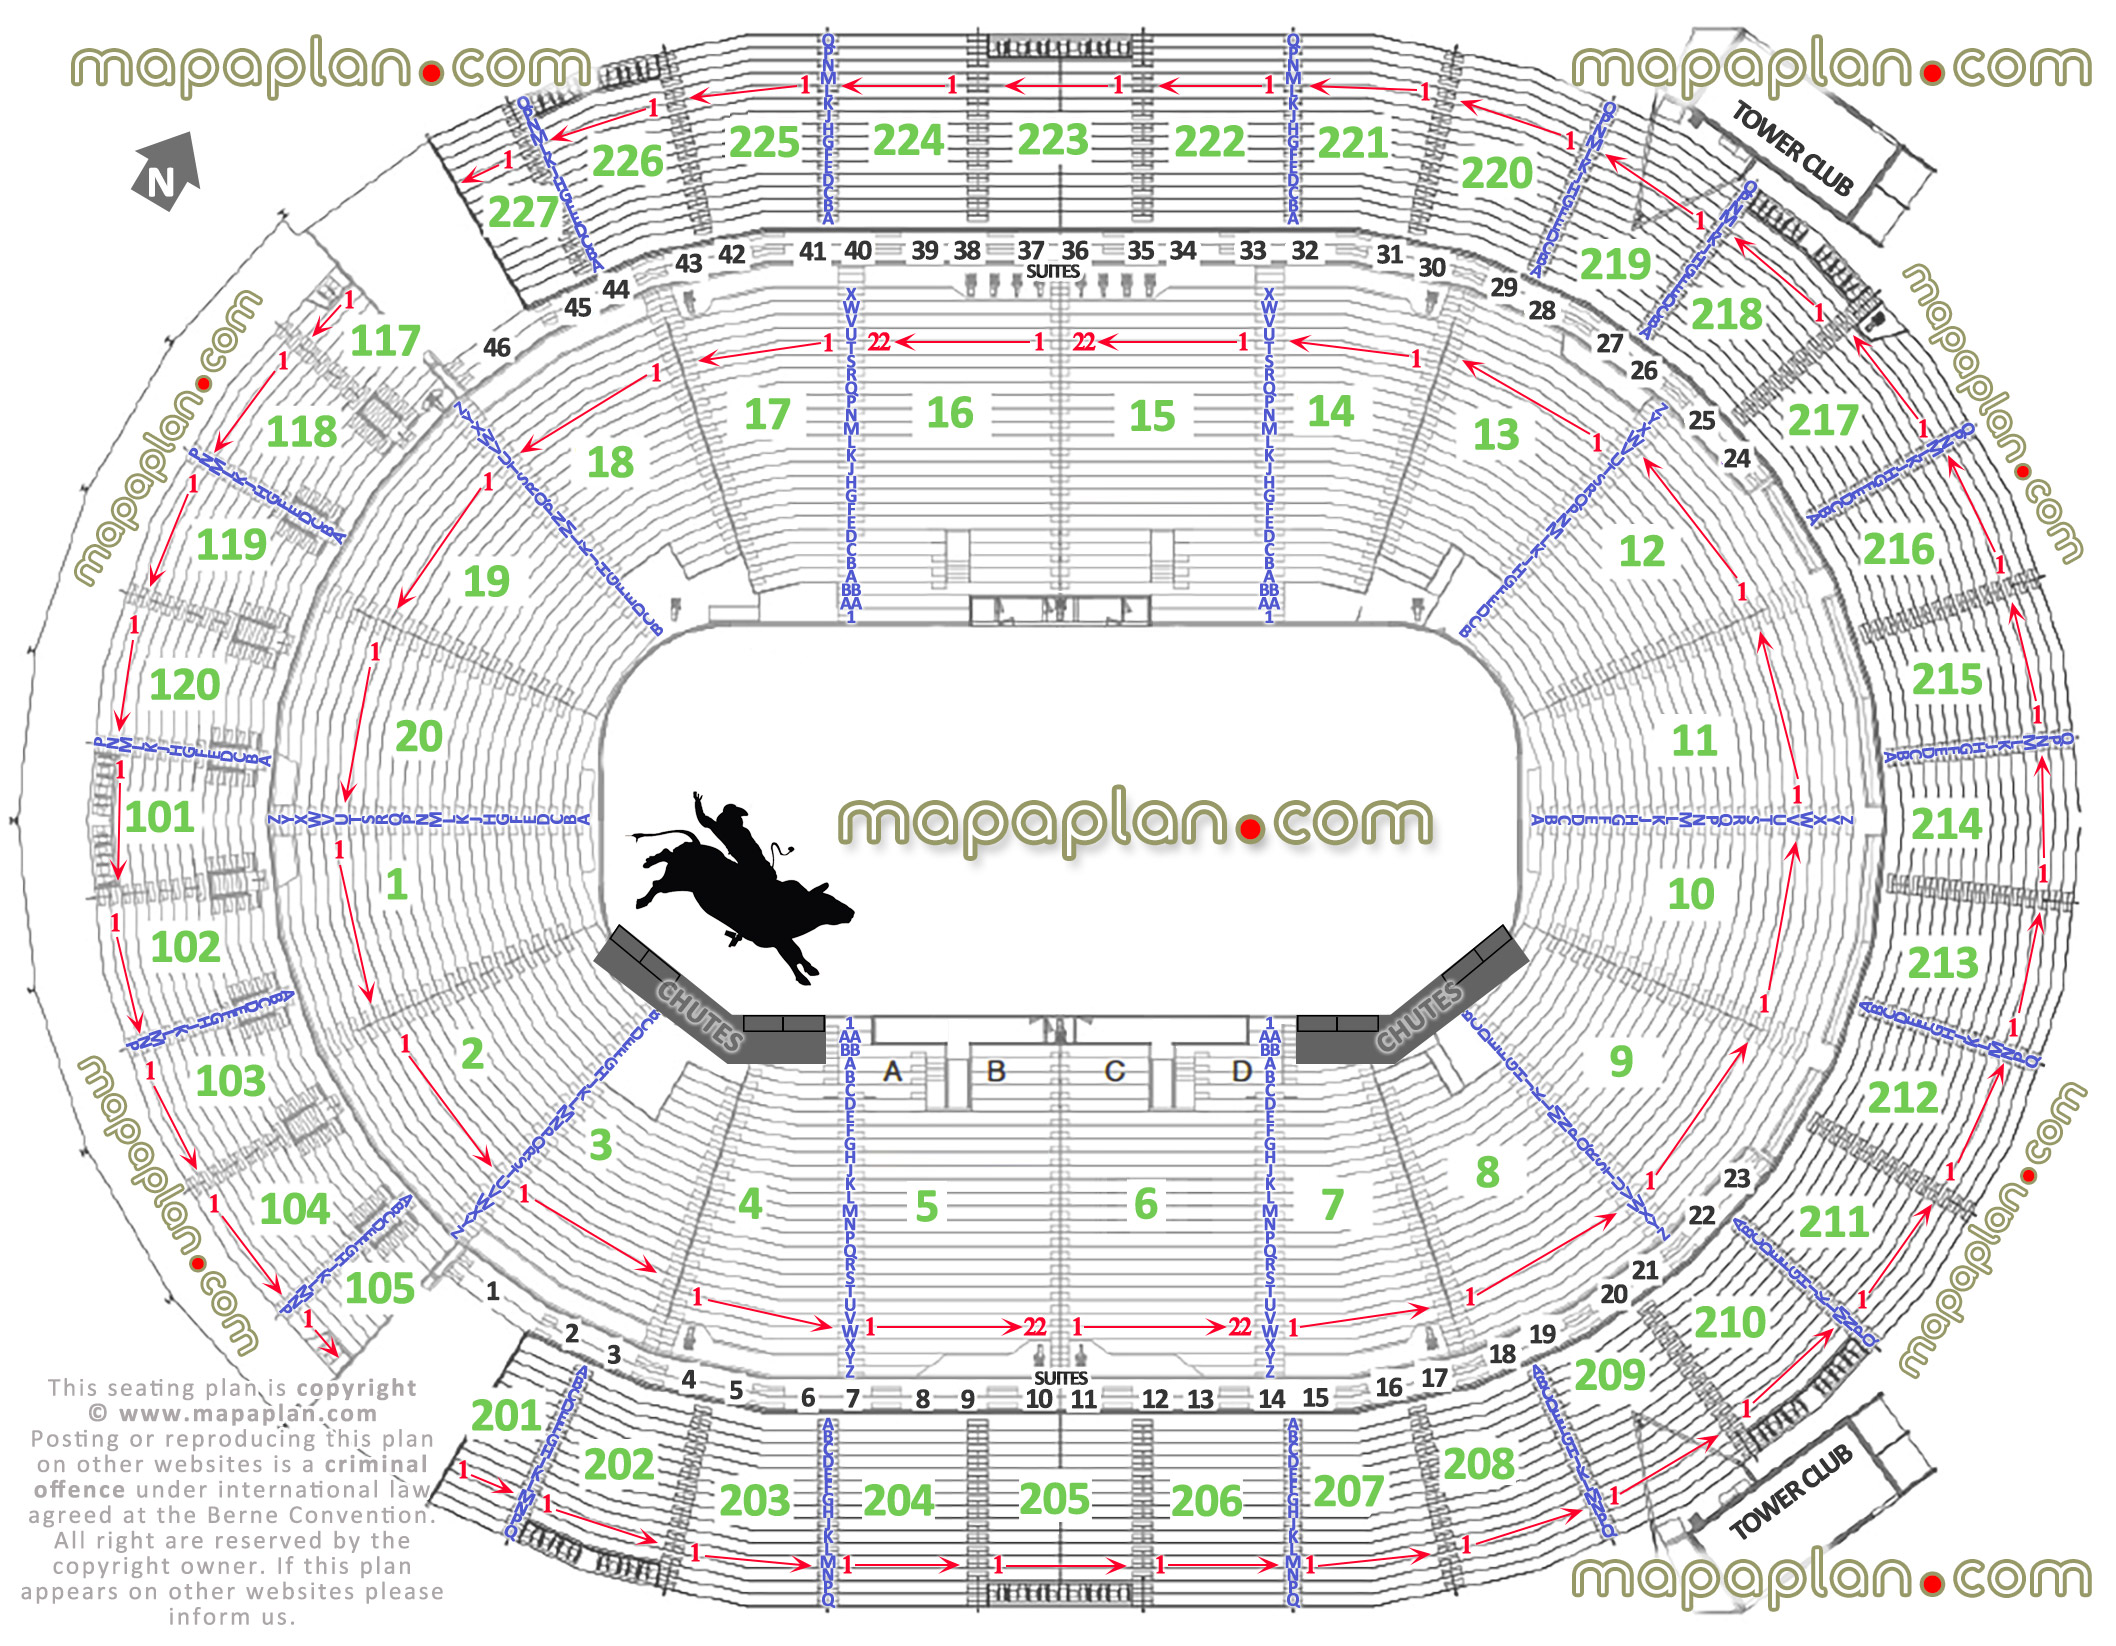 t mobile arena seating chart with rows - Part.tscoreks.org